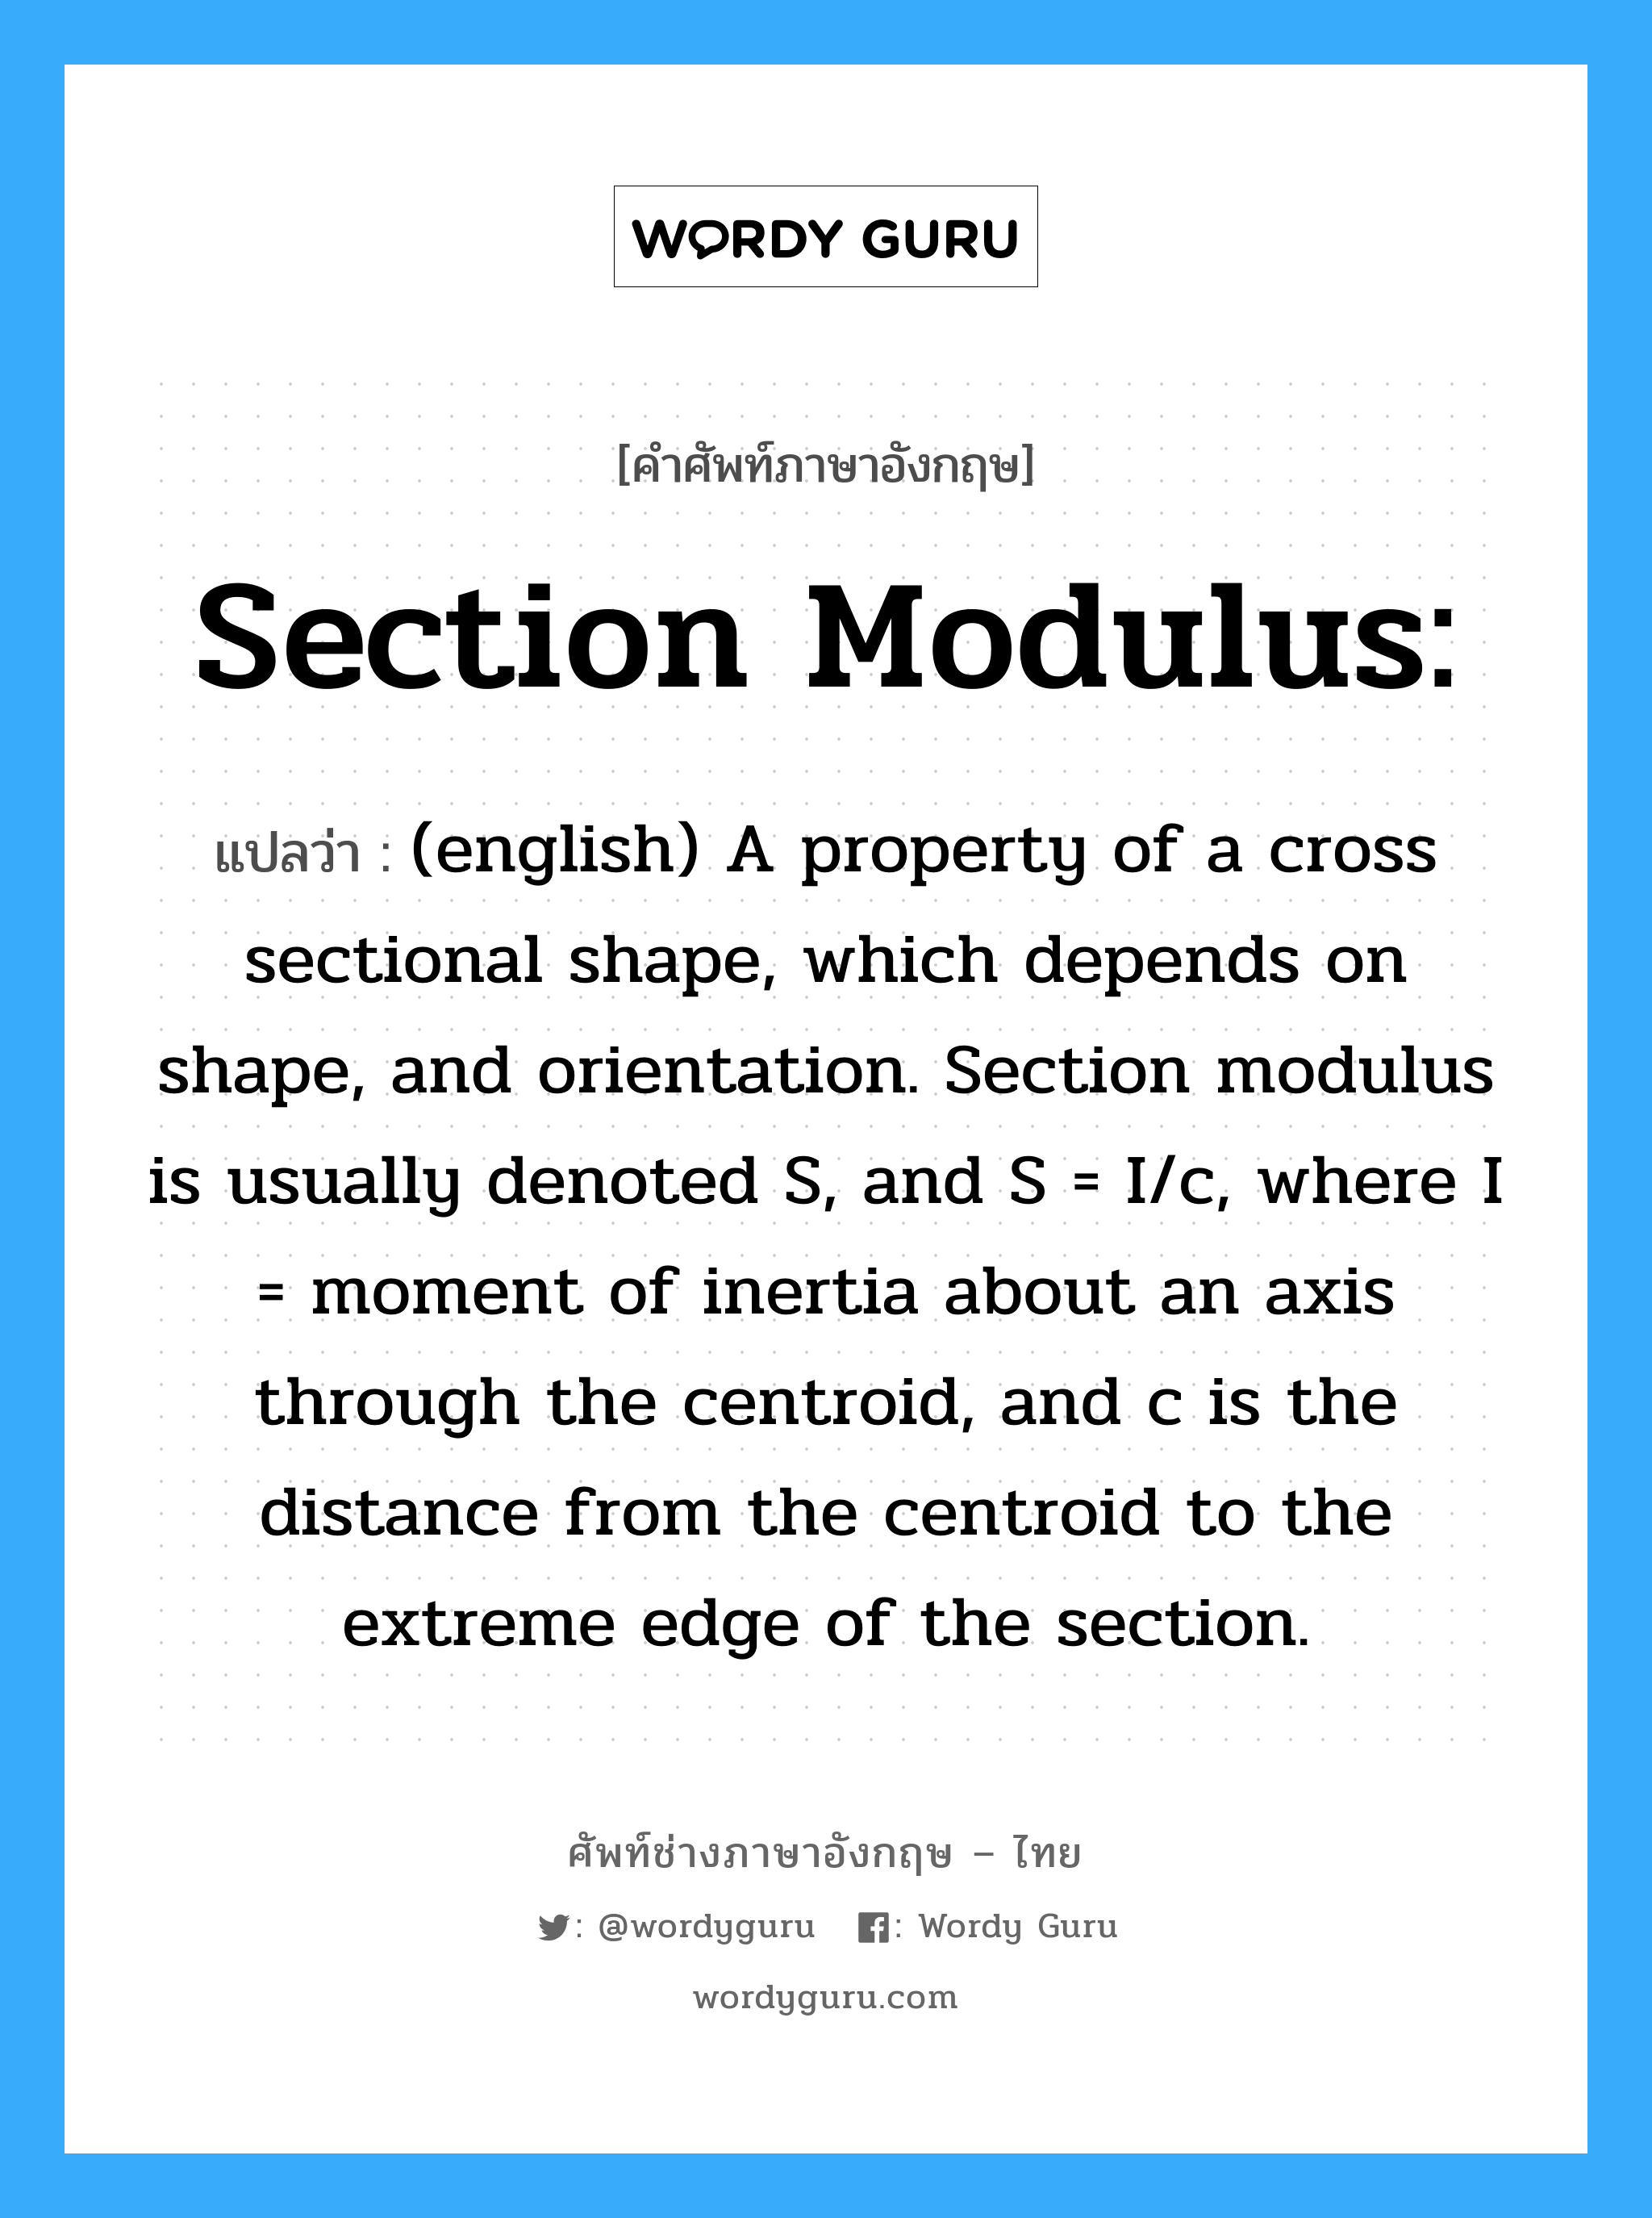 (english) A property of a cross sectional shape, which depends on shape, and orientation. Section modulus is usually denoted S, and S = I/c, where I = moment of inertia about an axis through the centroid, and c is the distance from the centroid to the extreme edge of the section. ภาษาอังกฤษ?, คำศัพท์ช่างภาษาอังกฤษ - ไทย (english) A property of a cross sectional shape, which depends on shape, and orientation. Section modulus is usually denoted S, and S = I/c, where I = moment of inertia about an axis through the centroid, and c is the distance from the centroid to the extreme edge of the section. คำศัพท์ภาษาอังกฤษ (english) A property of a cross sectional shape, which depends on shape, and orientation. Section modulus is usually denoted S, and S = I/c, where I = moment of inertia about an axis through the centroid, and c is the distance from the centroid to the extreme edge of the section. แปลว่า Section Modulus: